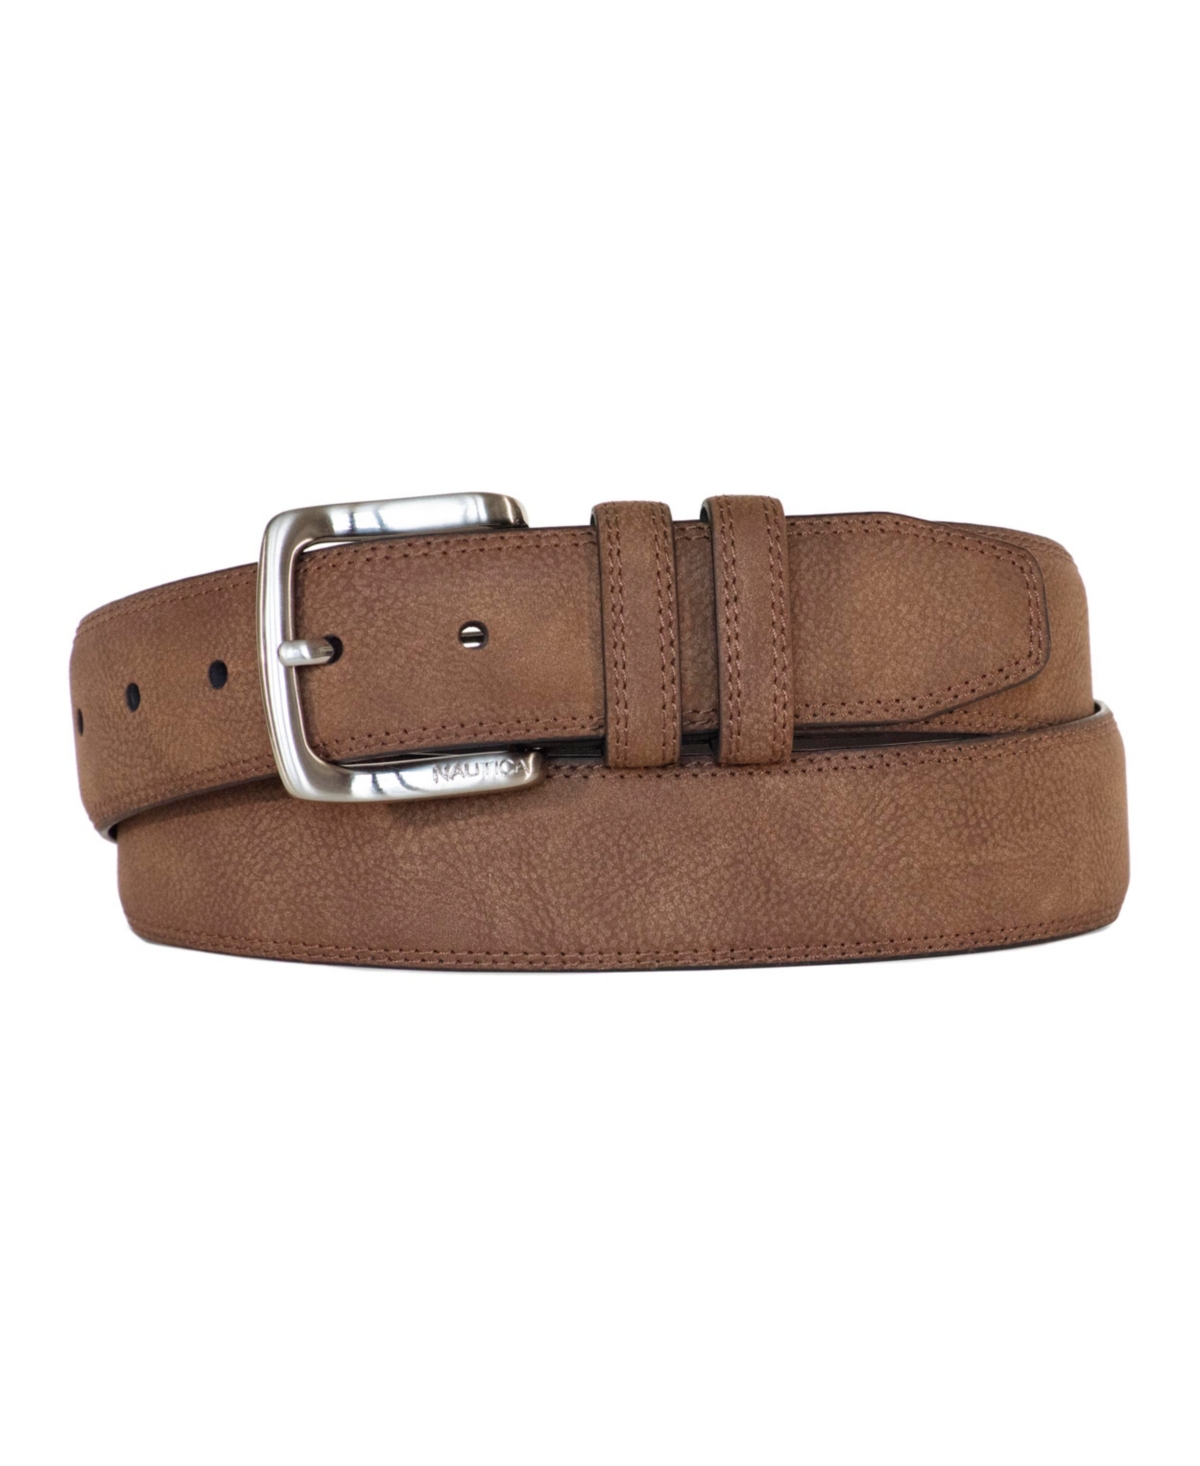 Men's Casual Padded Leather Belt - Tan